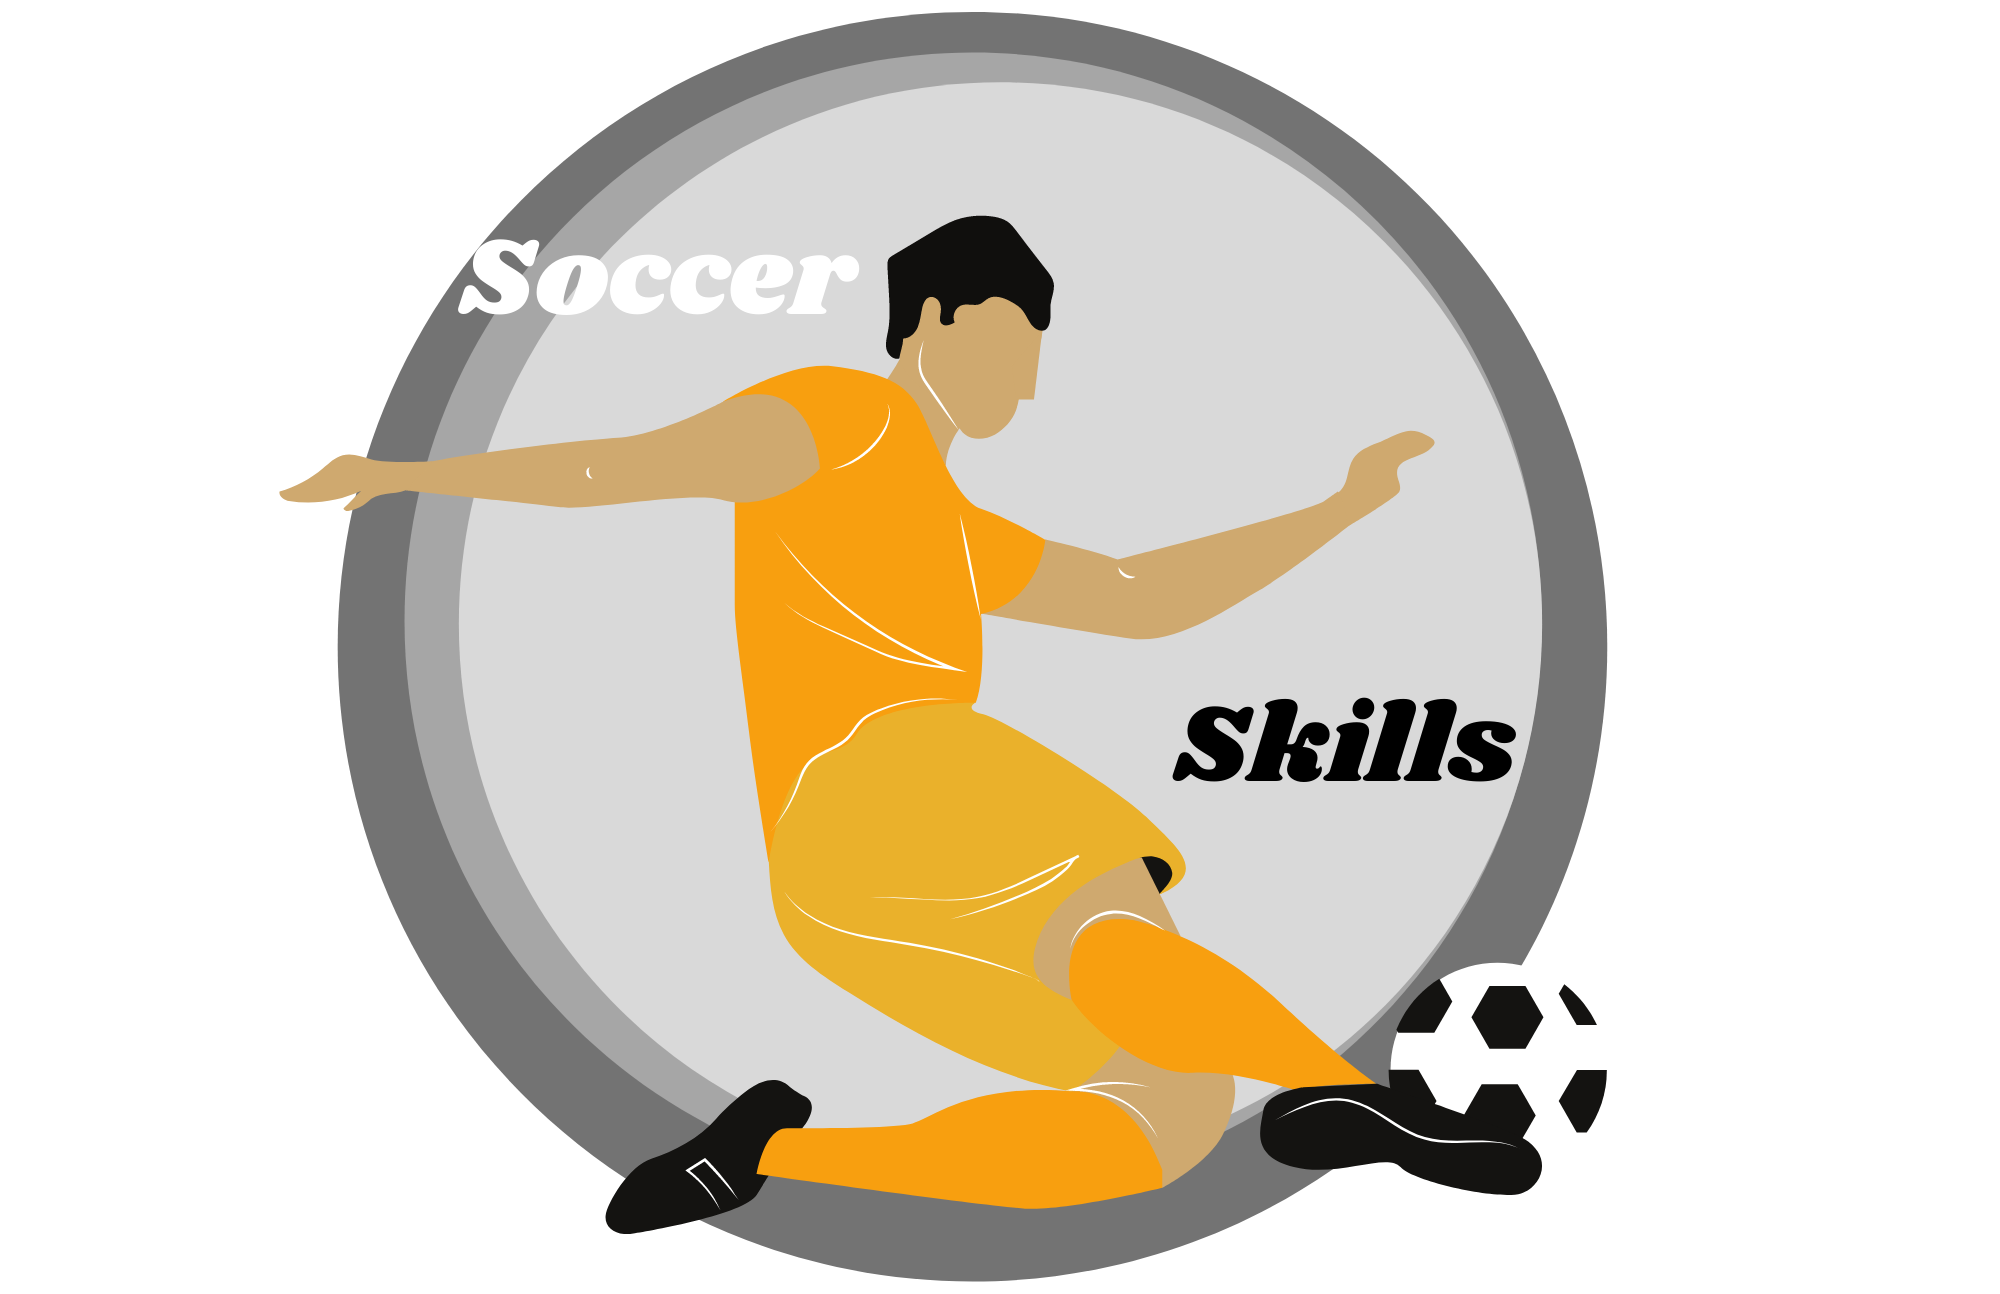 A List Of Soccer Skills - Begin Your Soccer Career With These Fundamental Techniques